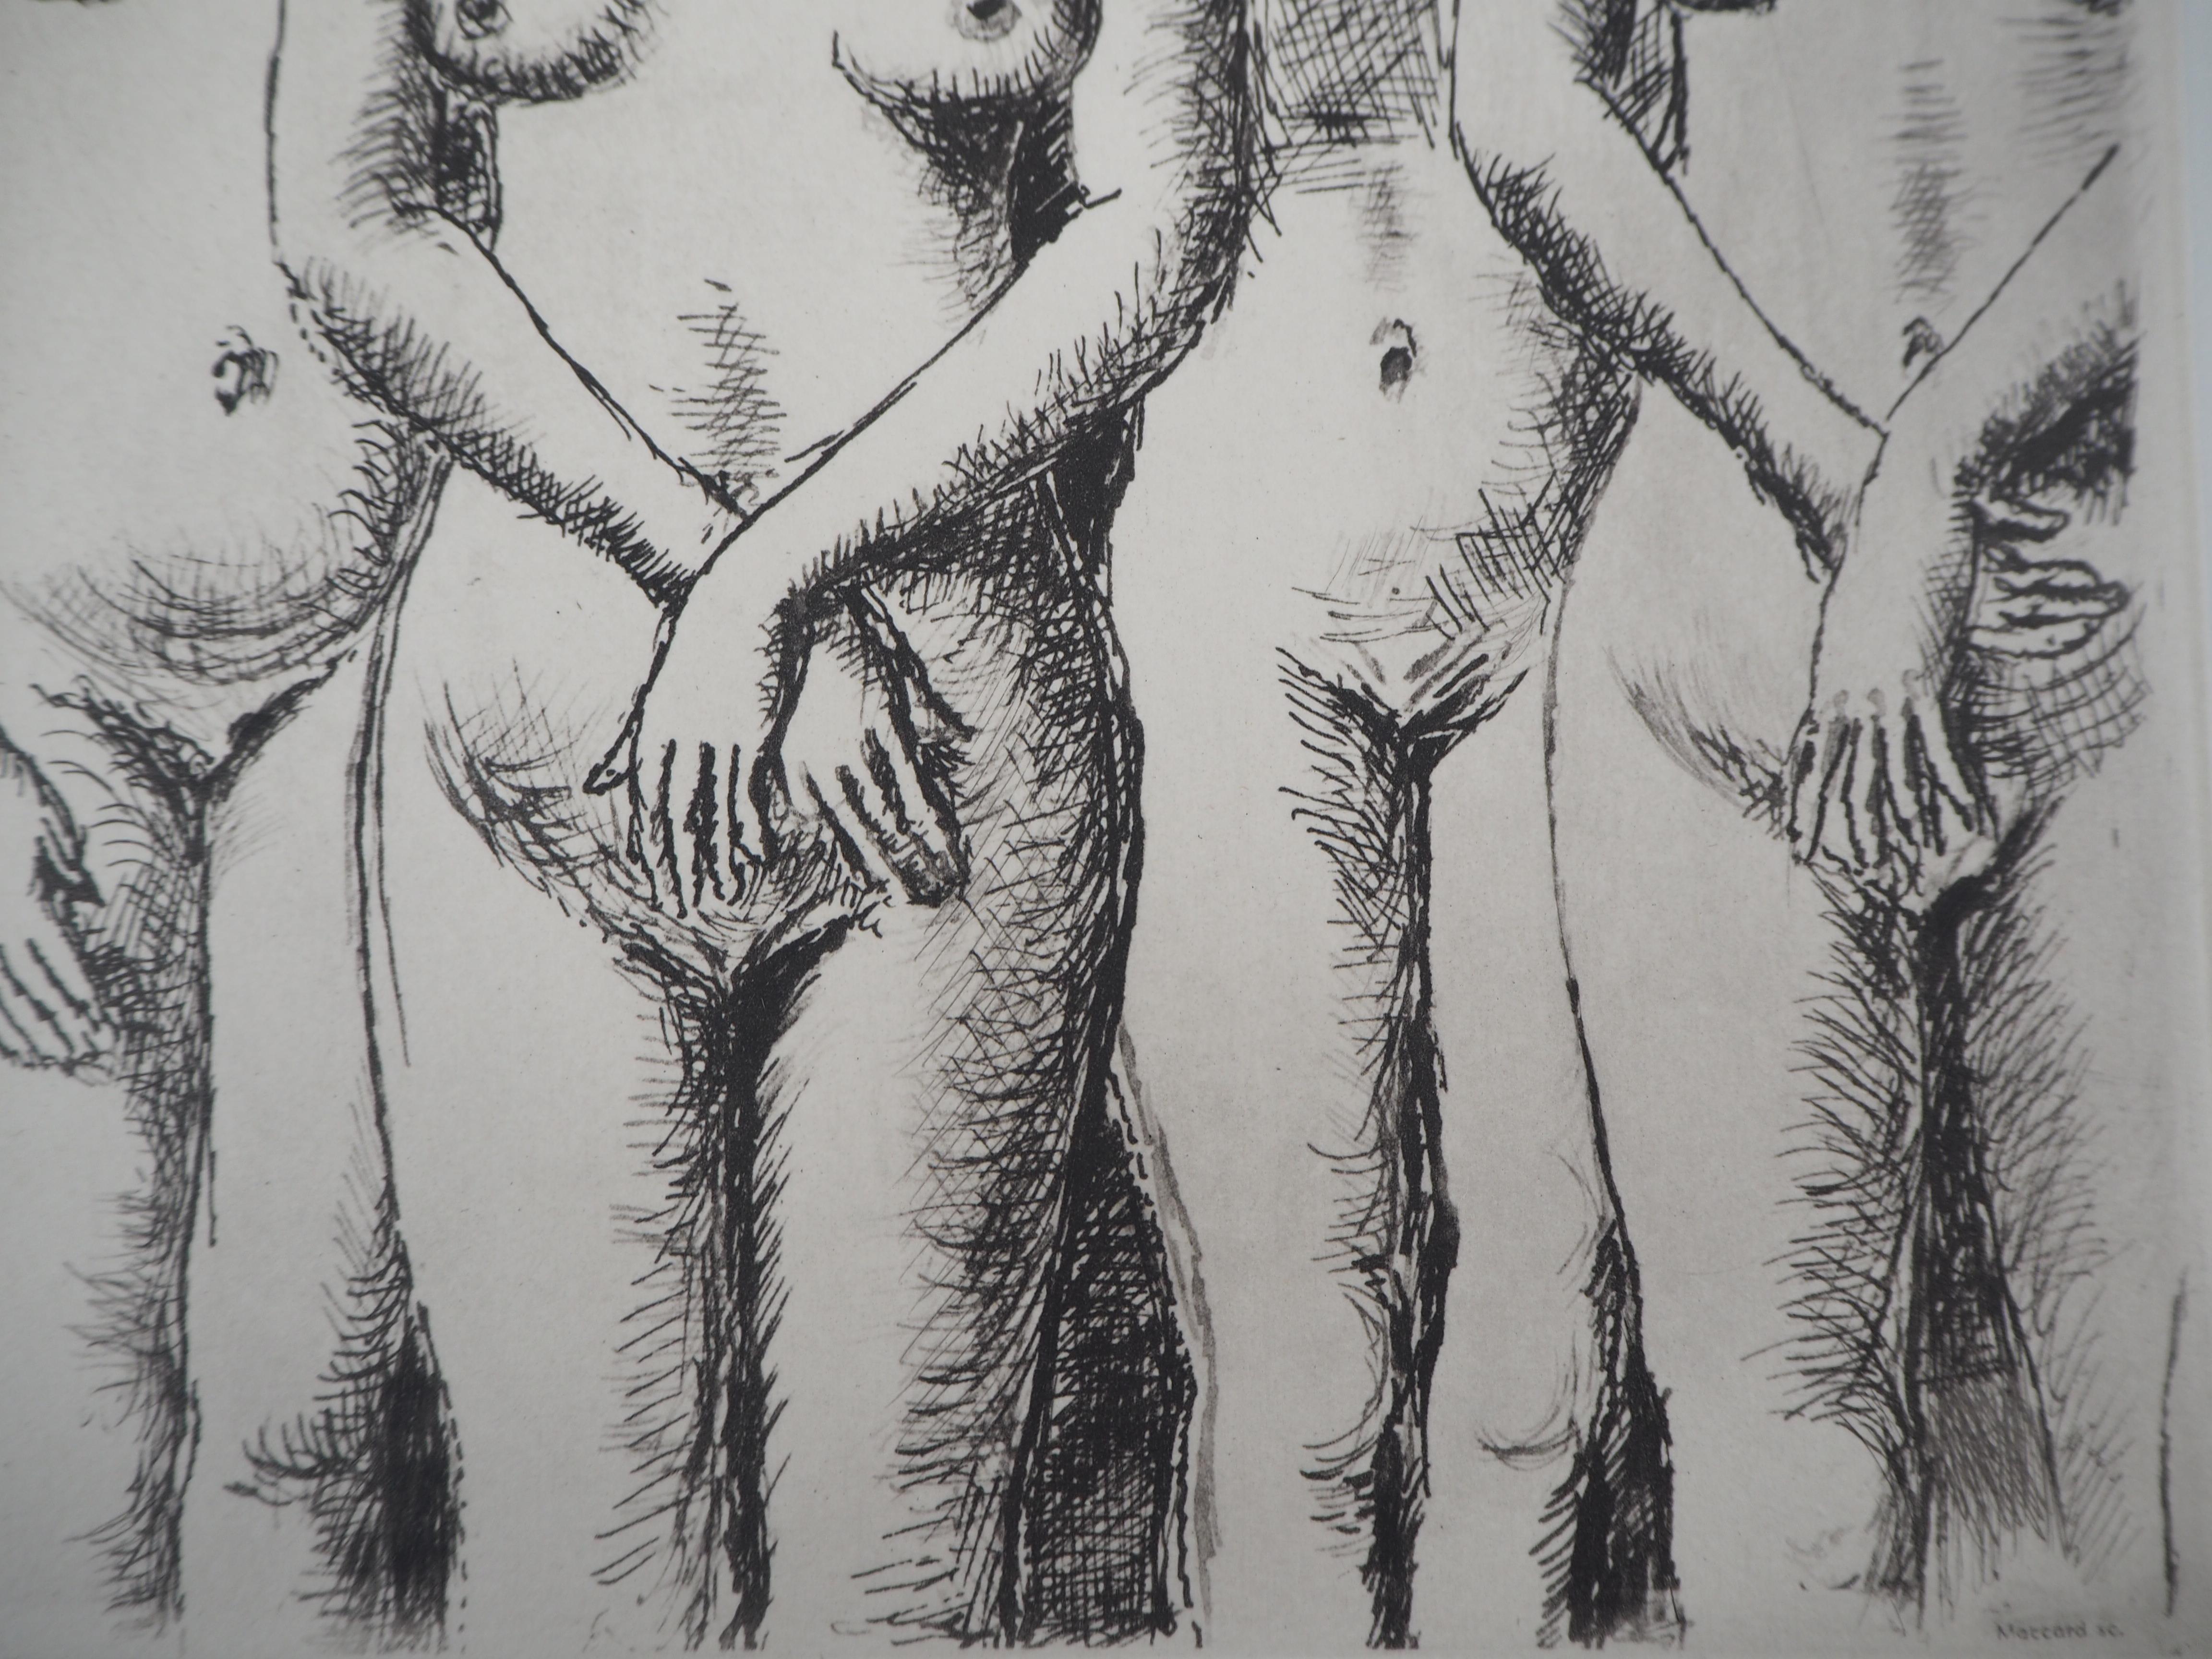 Sensuous Dream - Etching - 1970 - Gray Nude Print by Paul Delvaux